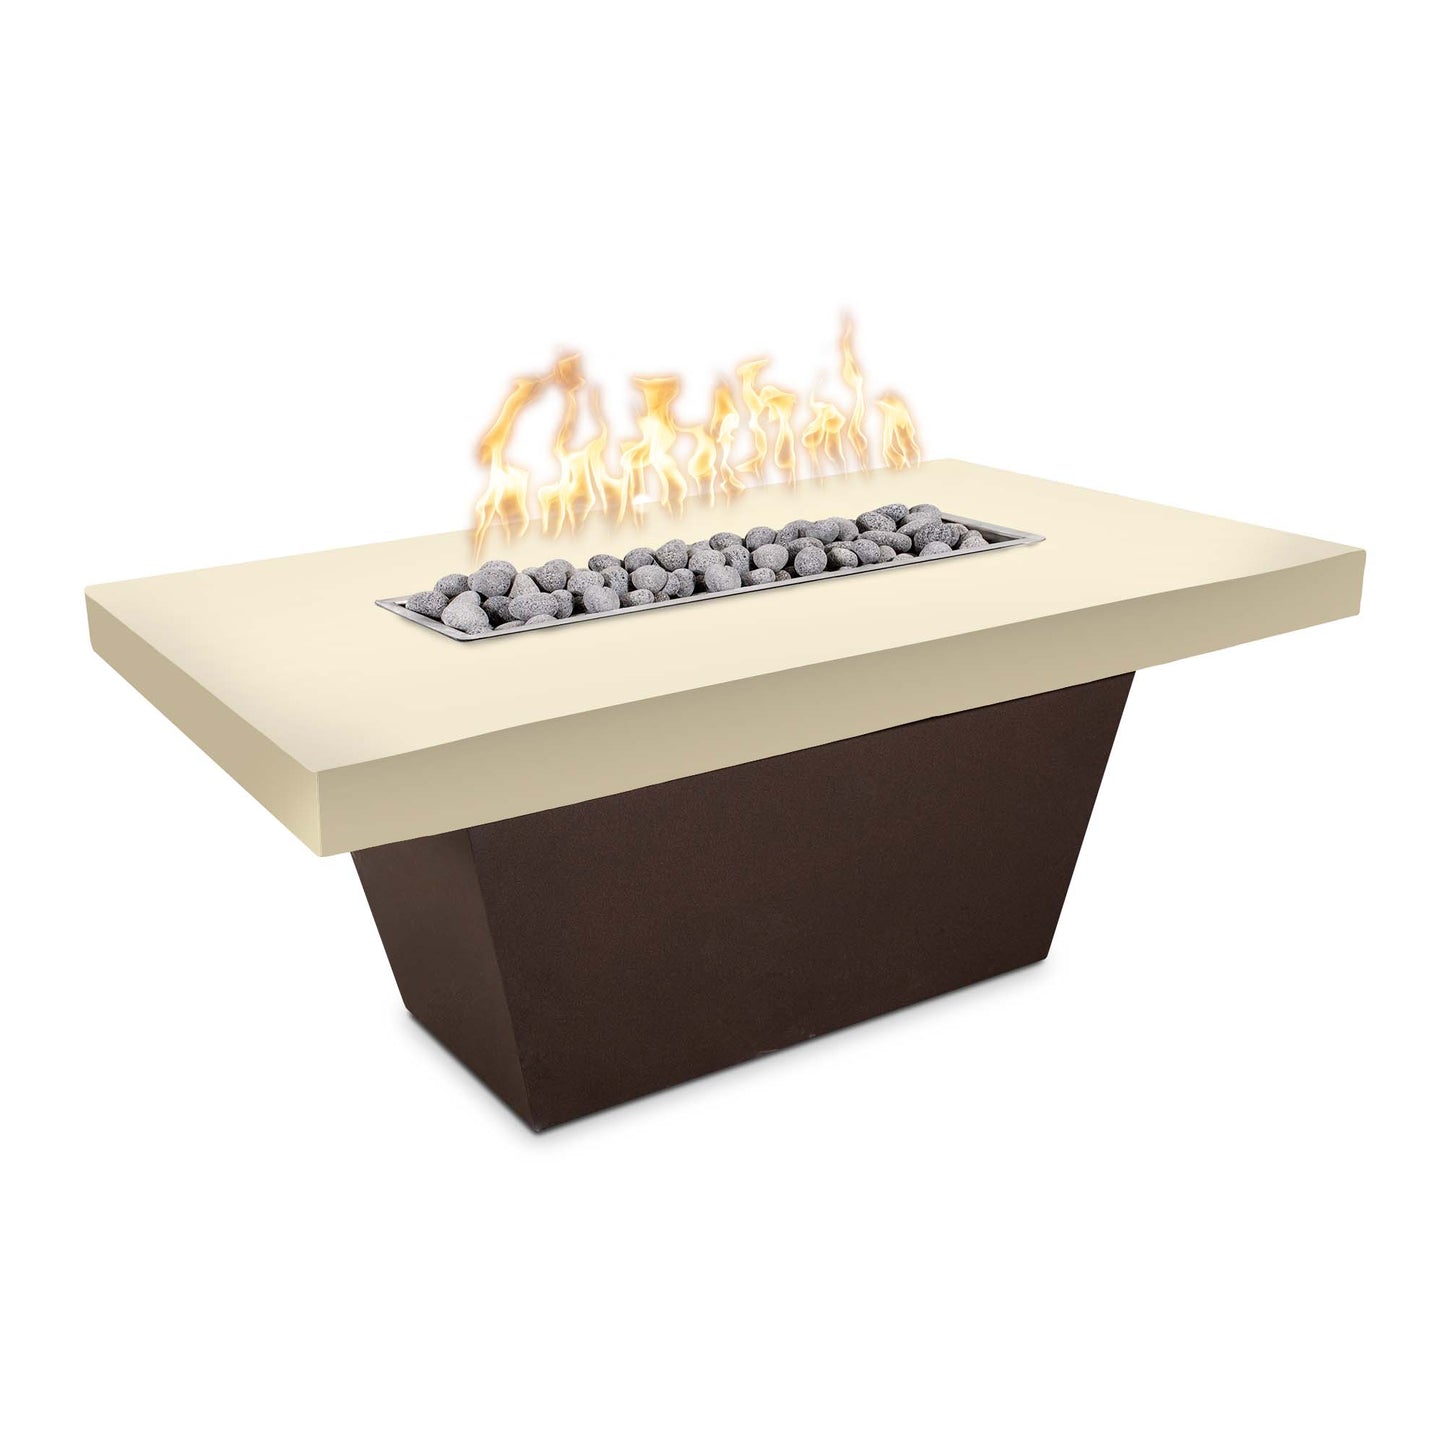 The Outdoor Plus Tacoma Smooth Concrete and Steel Fire Table + Free Cover